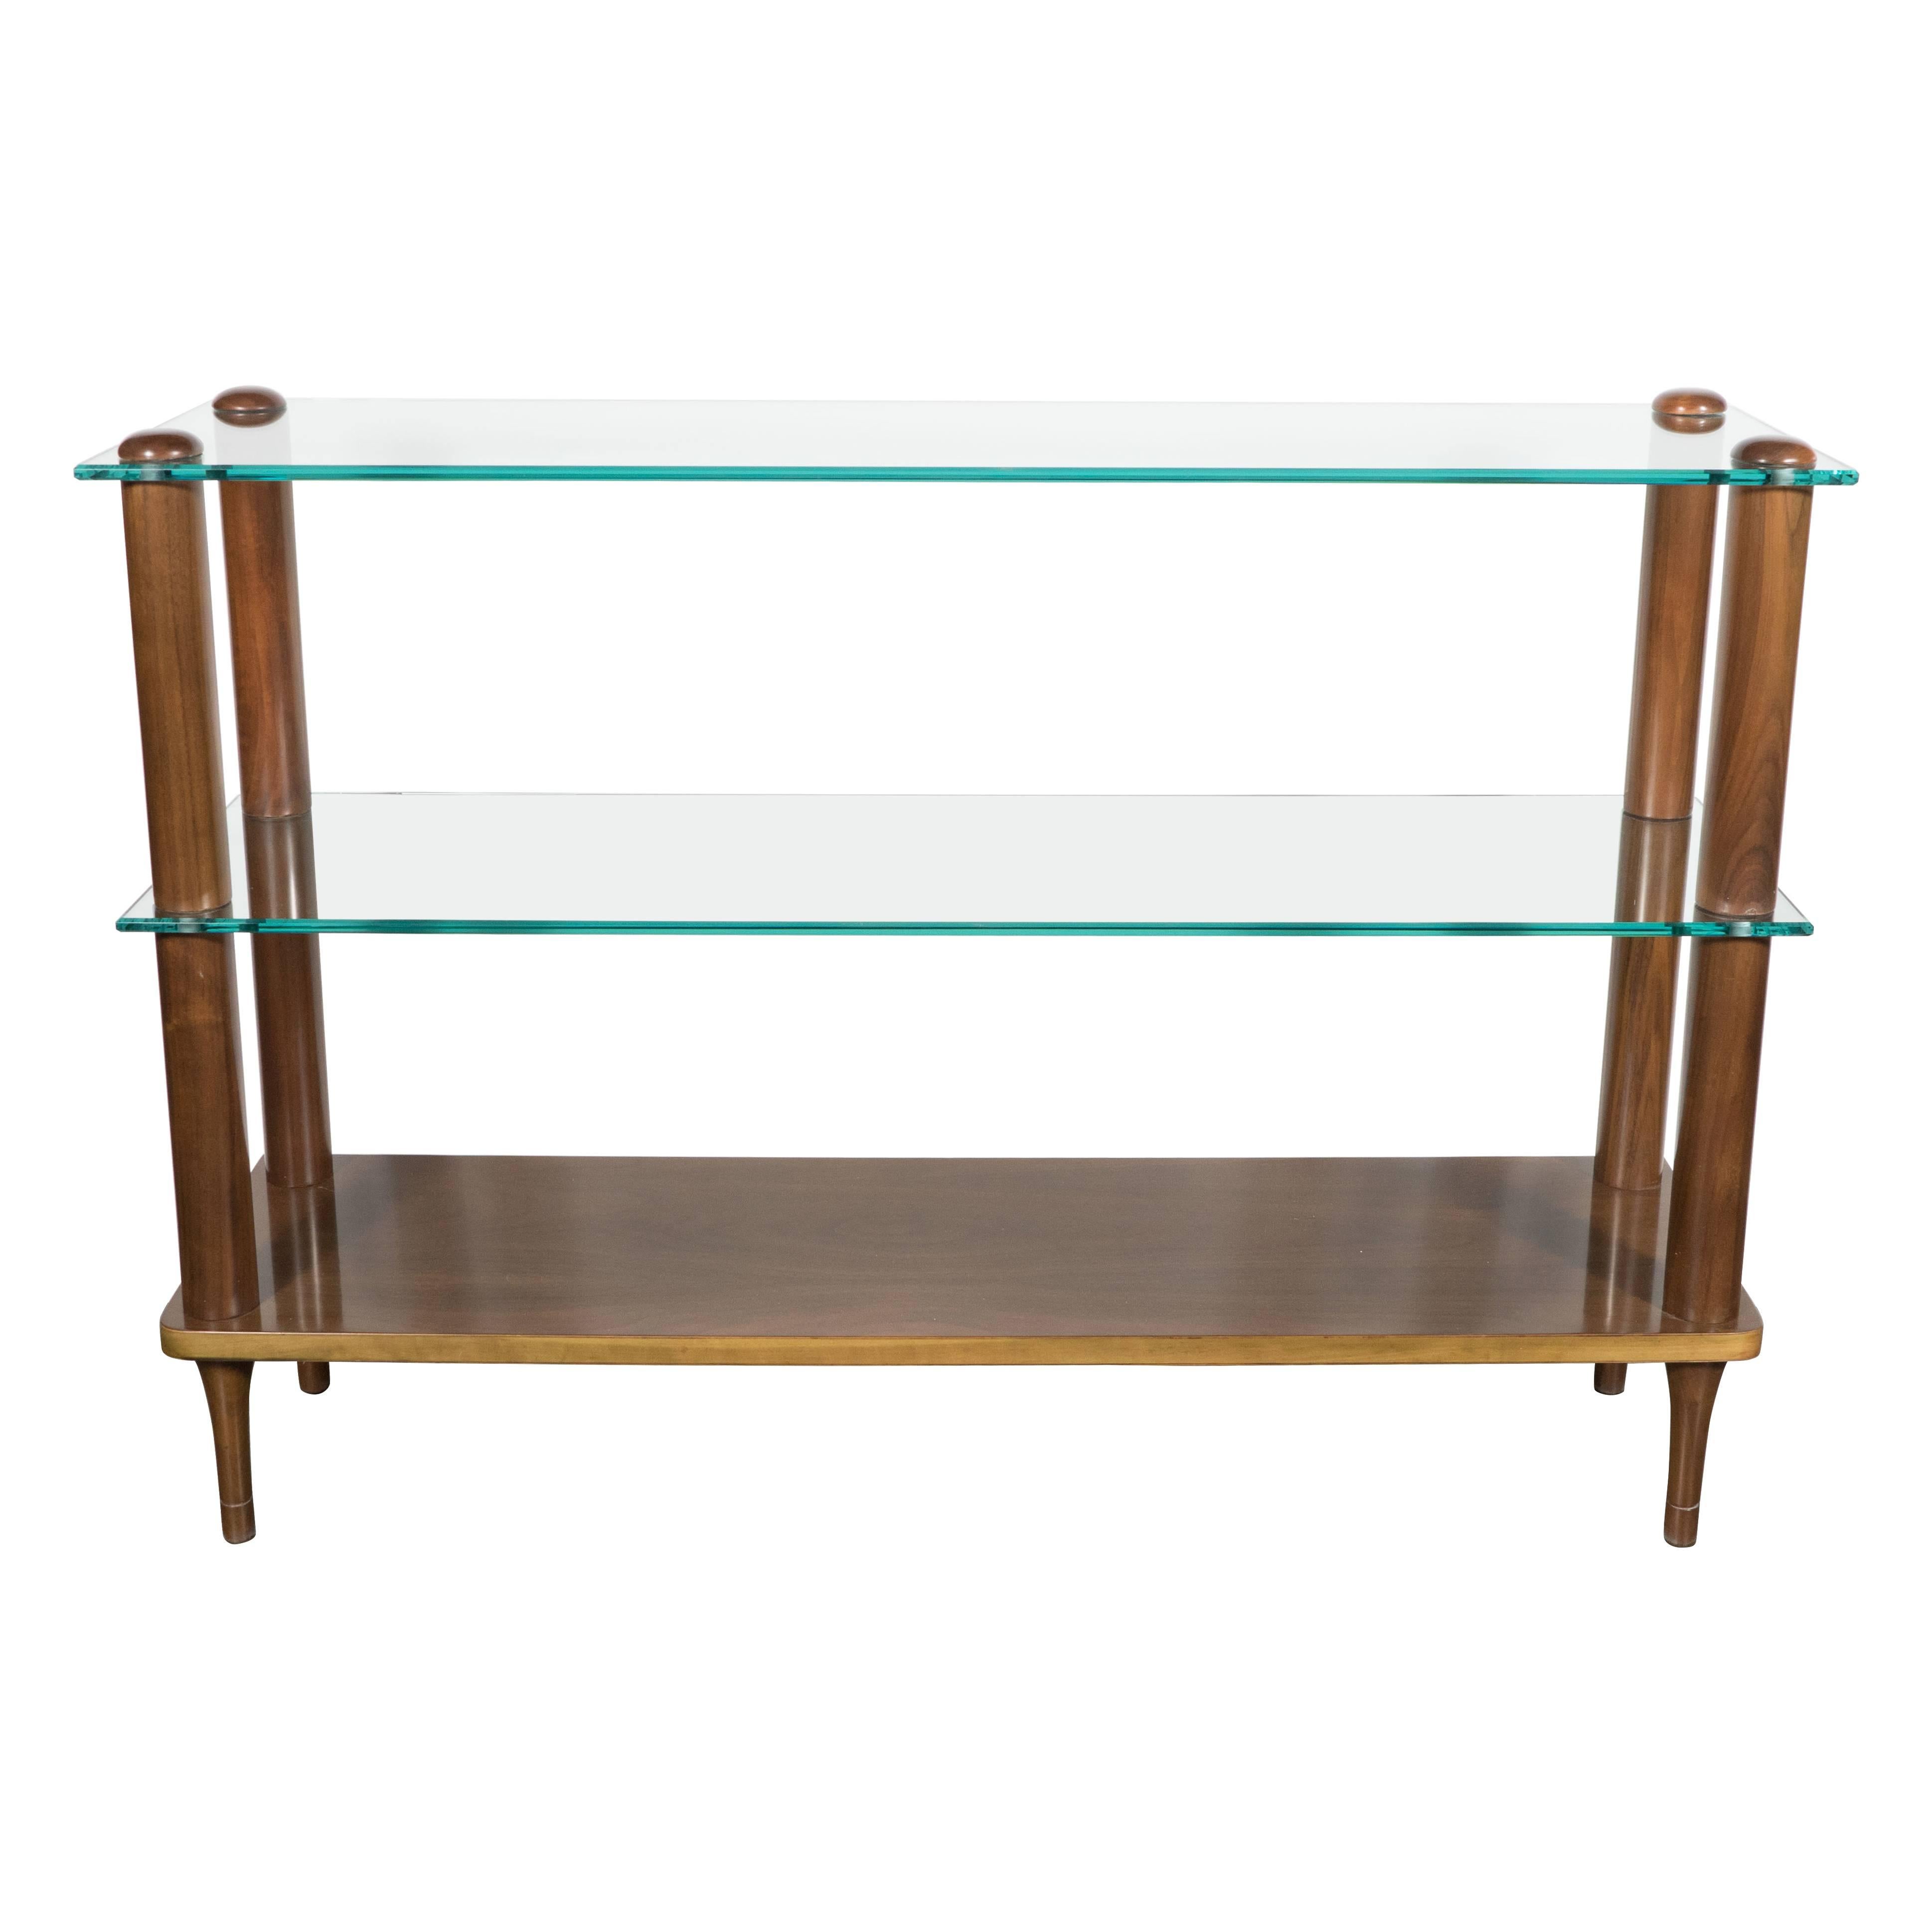 An Art Deco glass and walnut trio of shelving units by Gilbert Rohde. Each piece features three tiers: the bottom in hand-rubbed bookmatched walnut and the upper two in glass. These pieces can either be used side by side as one long unit, separately